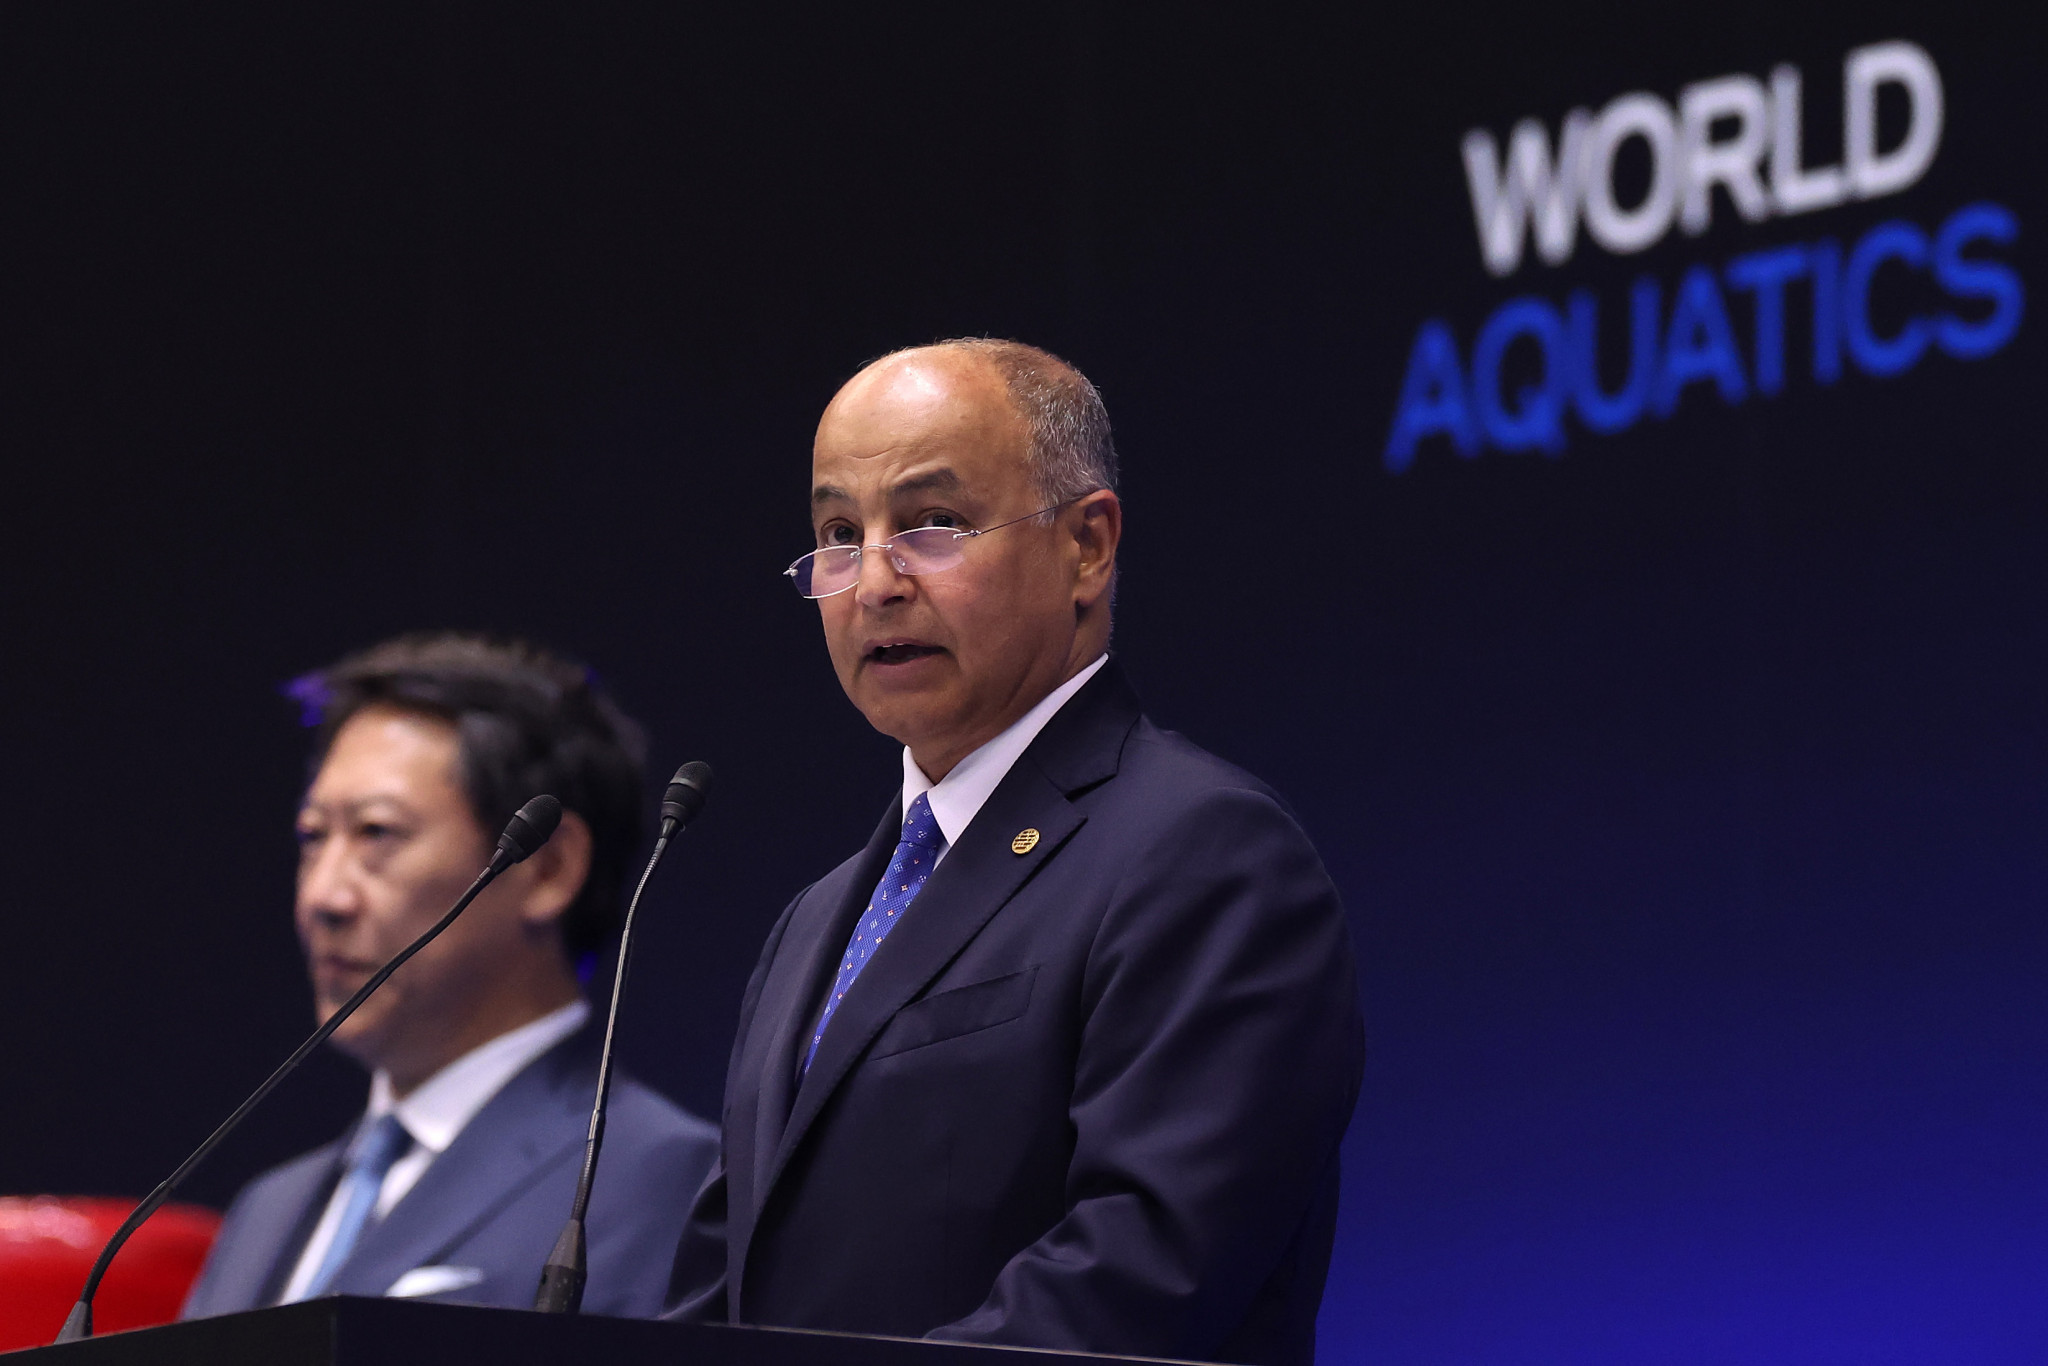 World Aquatics to launch open category for trans athletes at Swimming World